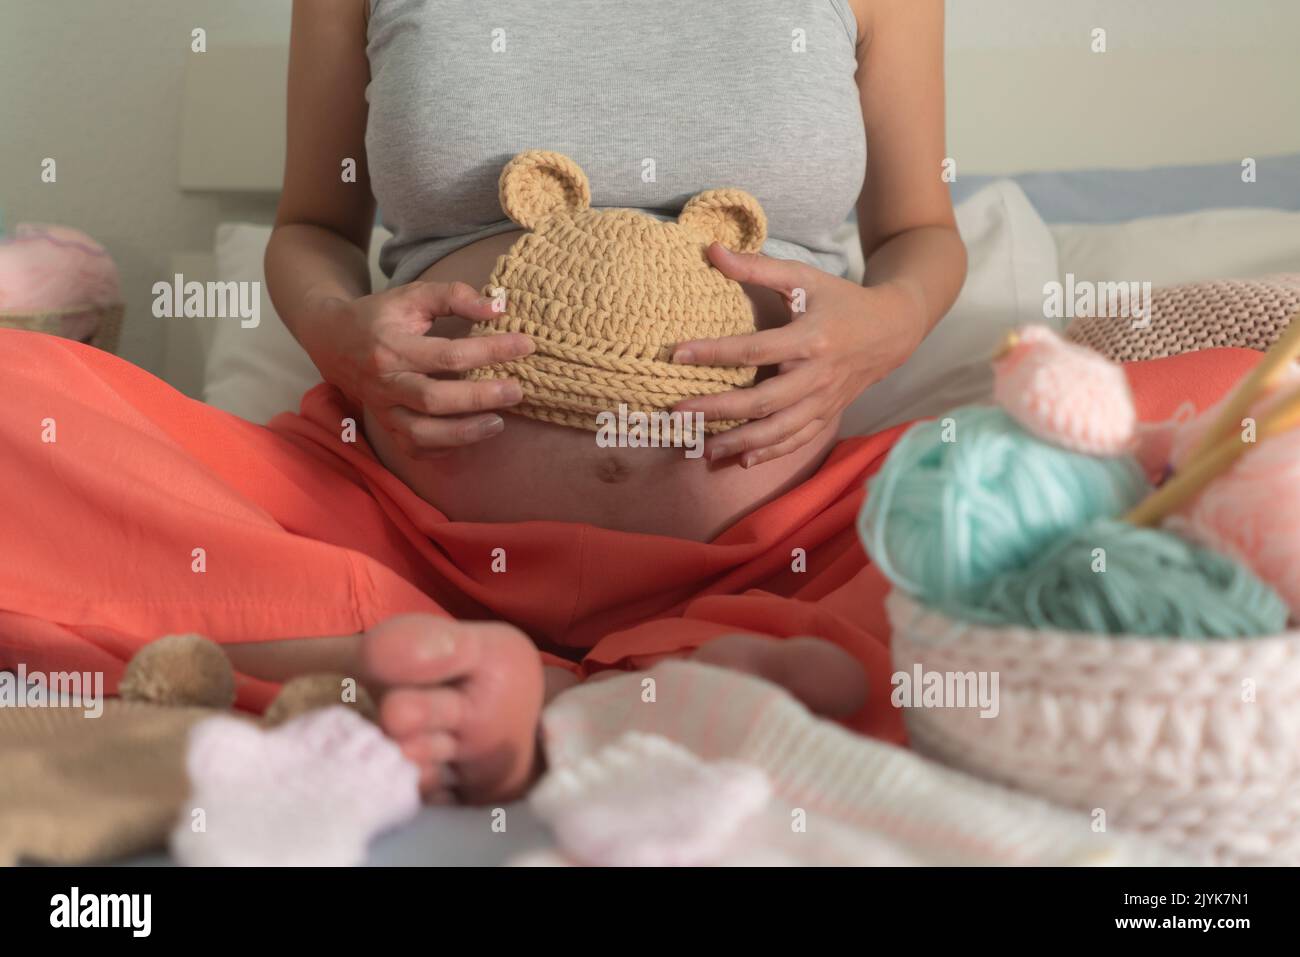 lifestyle home portrait of young happy woman knitting showing little bonnet for the new baby relaxed in her bedroom in maternity and handicraft concep Stock Photo